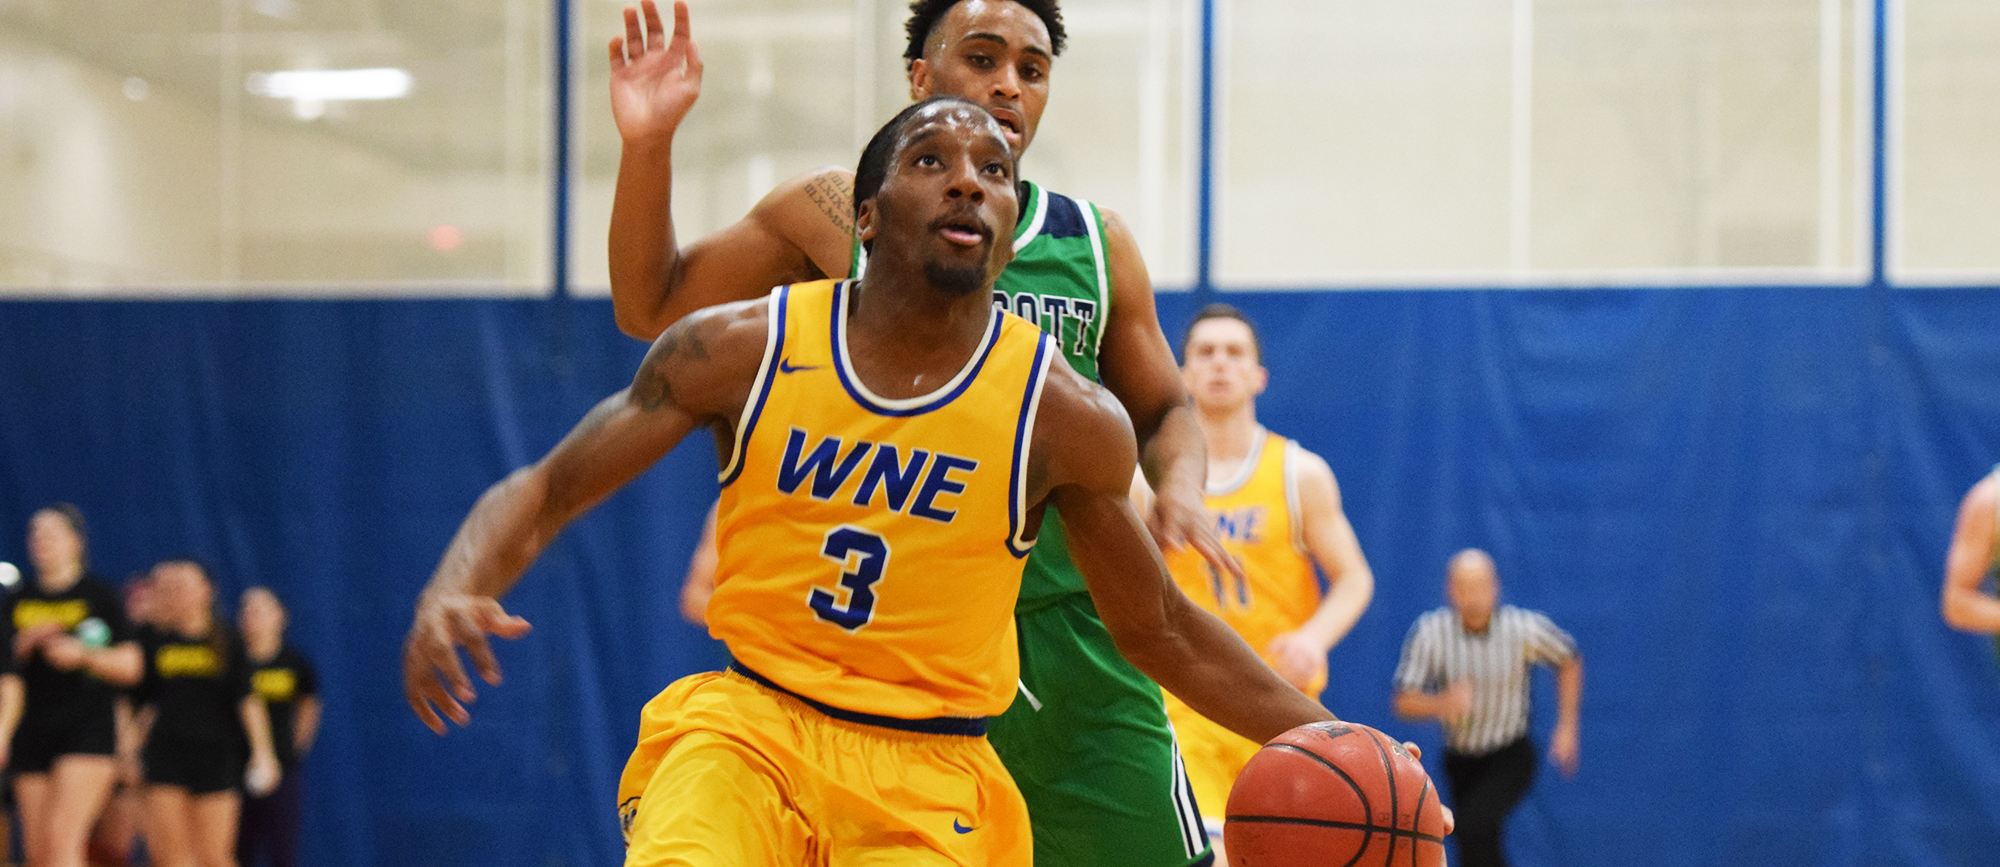 Junior Mikey Pettway recorded 23 points, a career-high 12 rebounds and seven assists in Tuesday's 92-85 loss to Endicott. (Photo by Rachael Margossian)